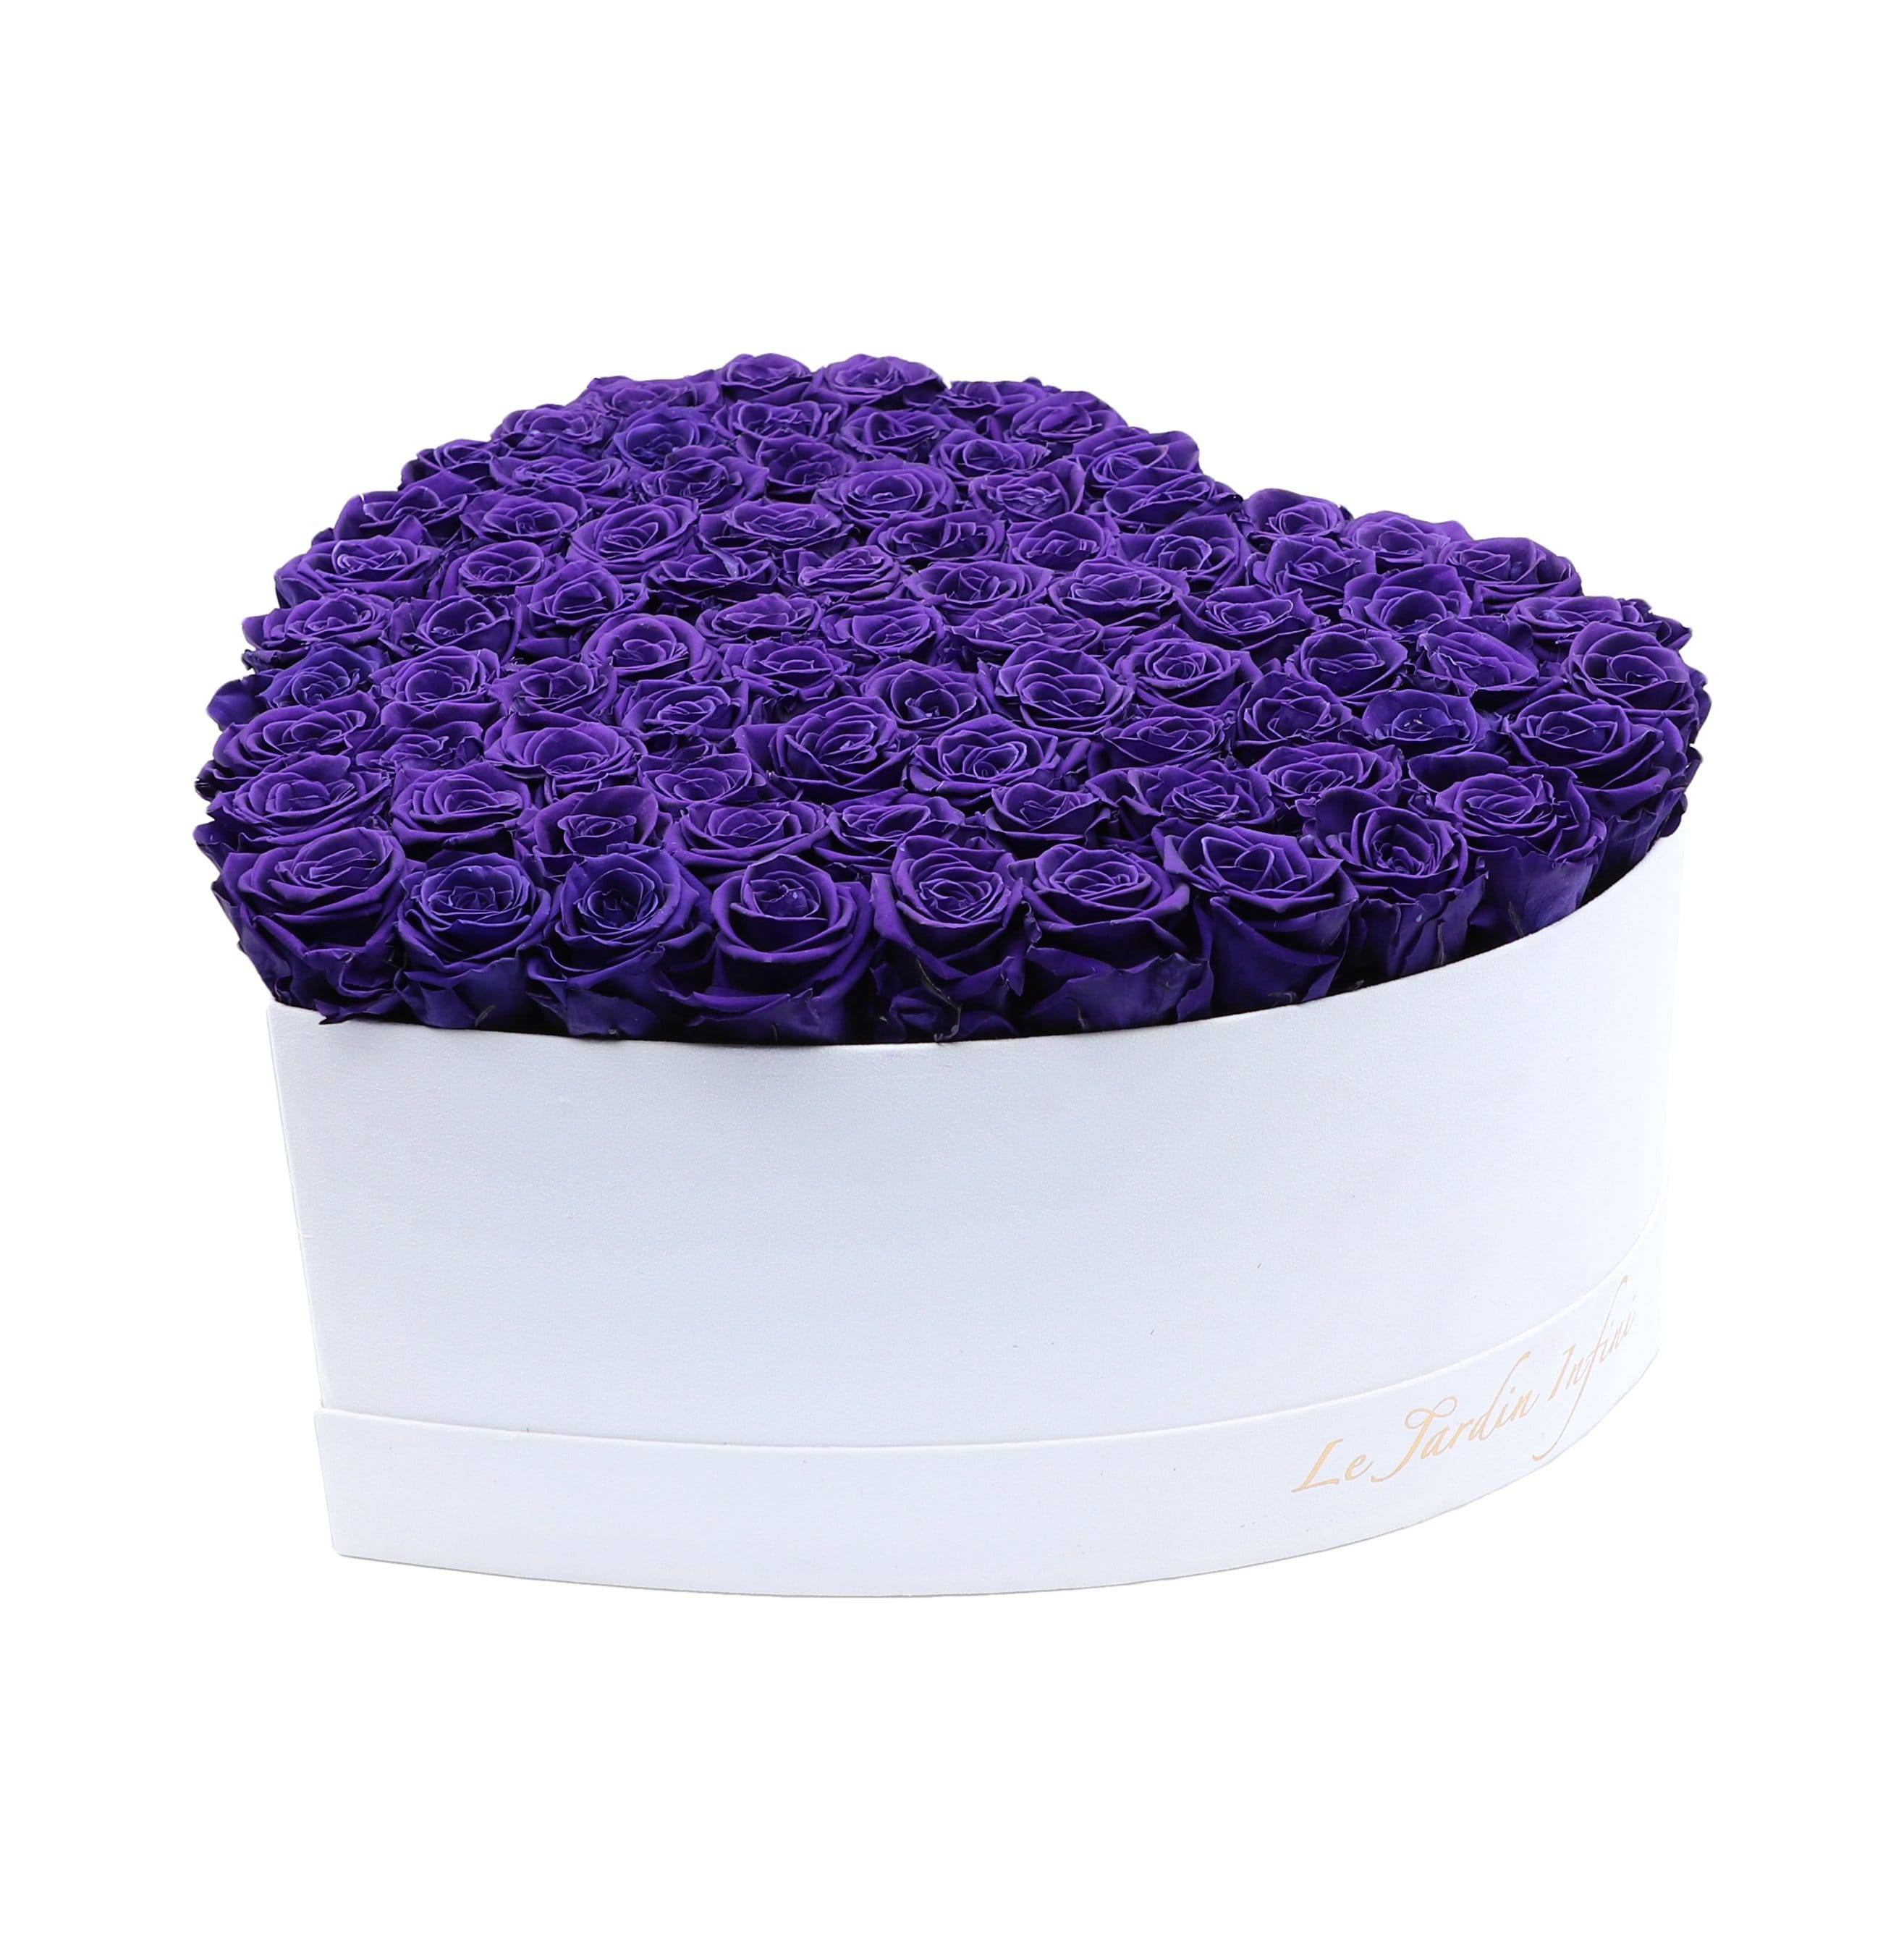 80-100 Purple Preserved Roses in A Heart Shaped Box- Large Heart Luxury White Suede Box (Custom)